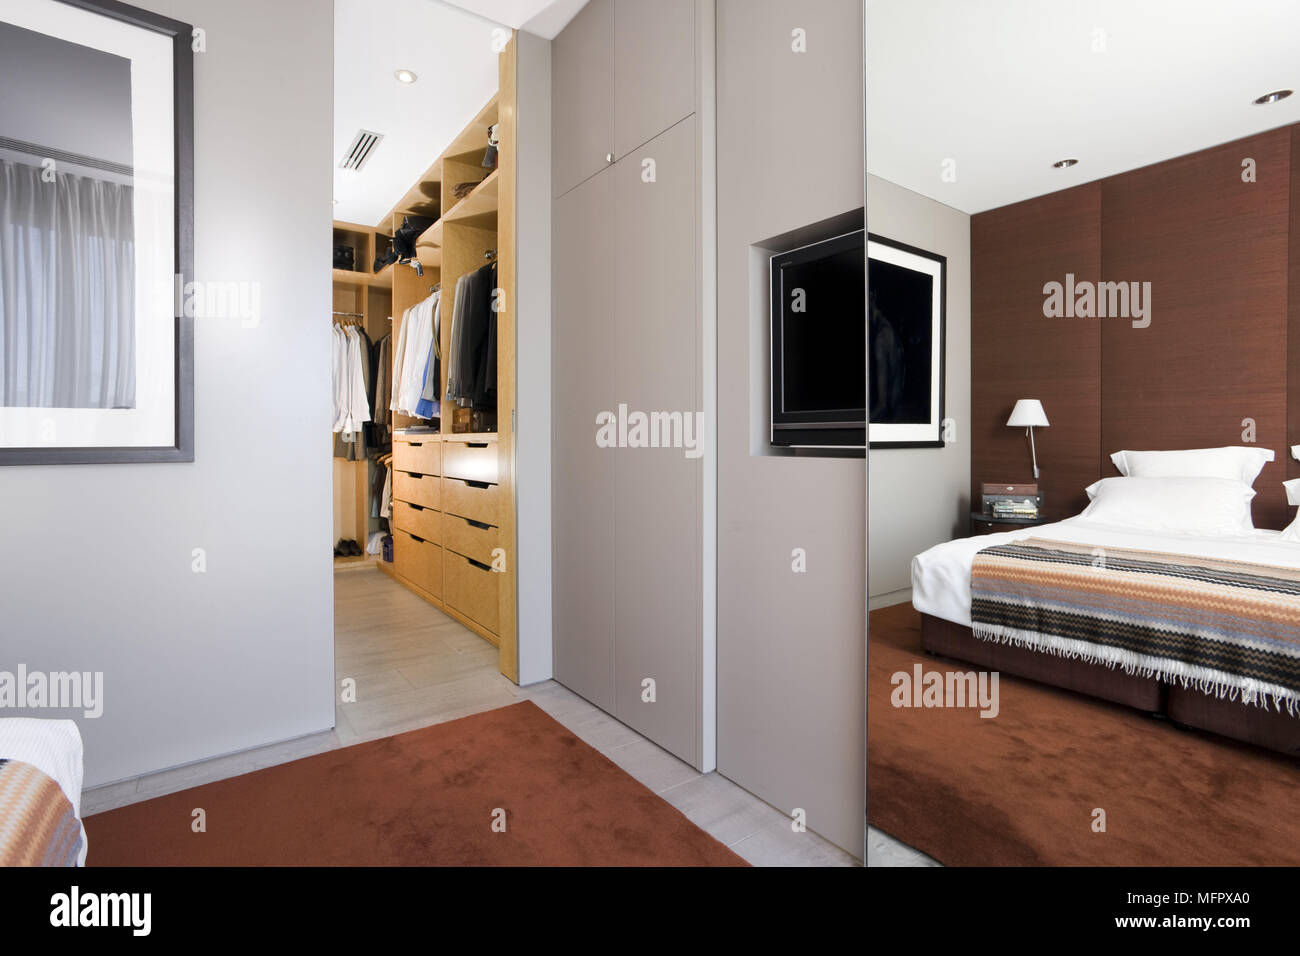 Sliding mirrored door concealing television and fitted wardrobes in modern bedroom with adjoining dressing room Stock Photo